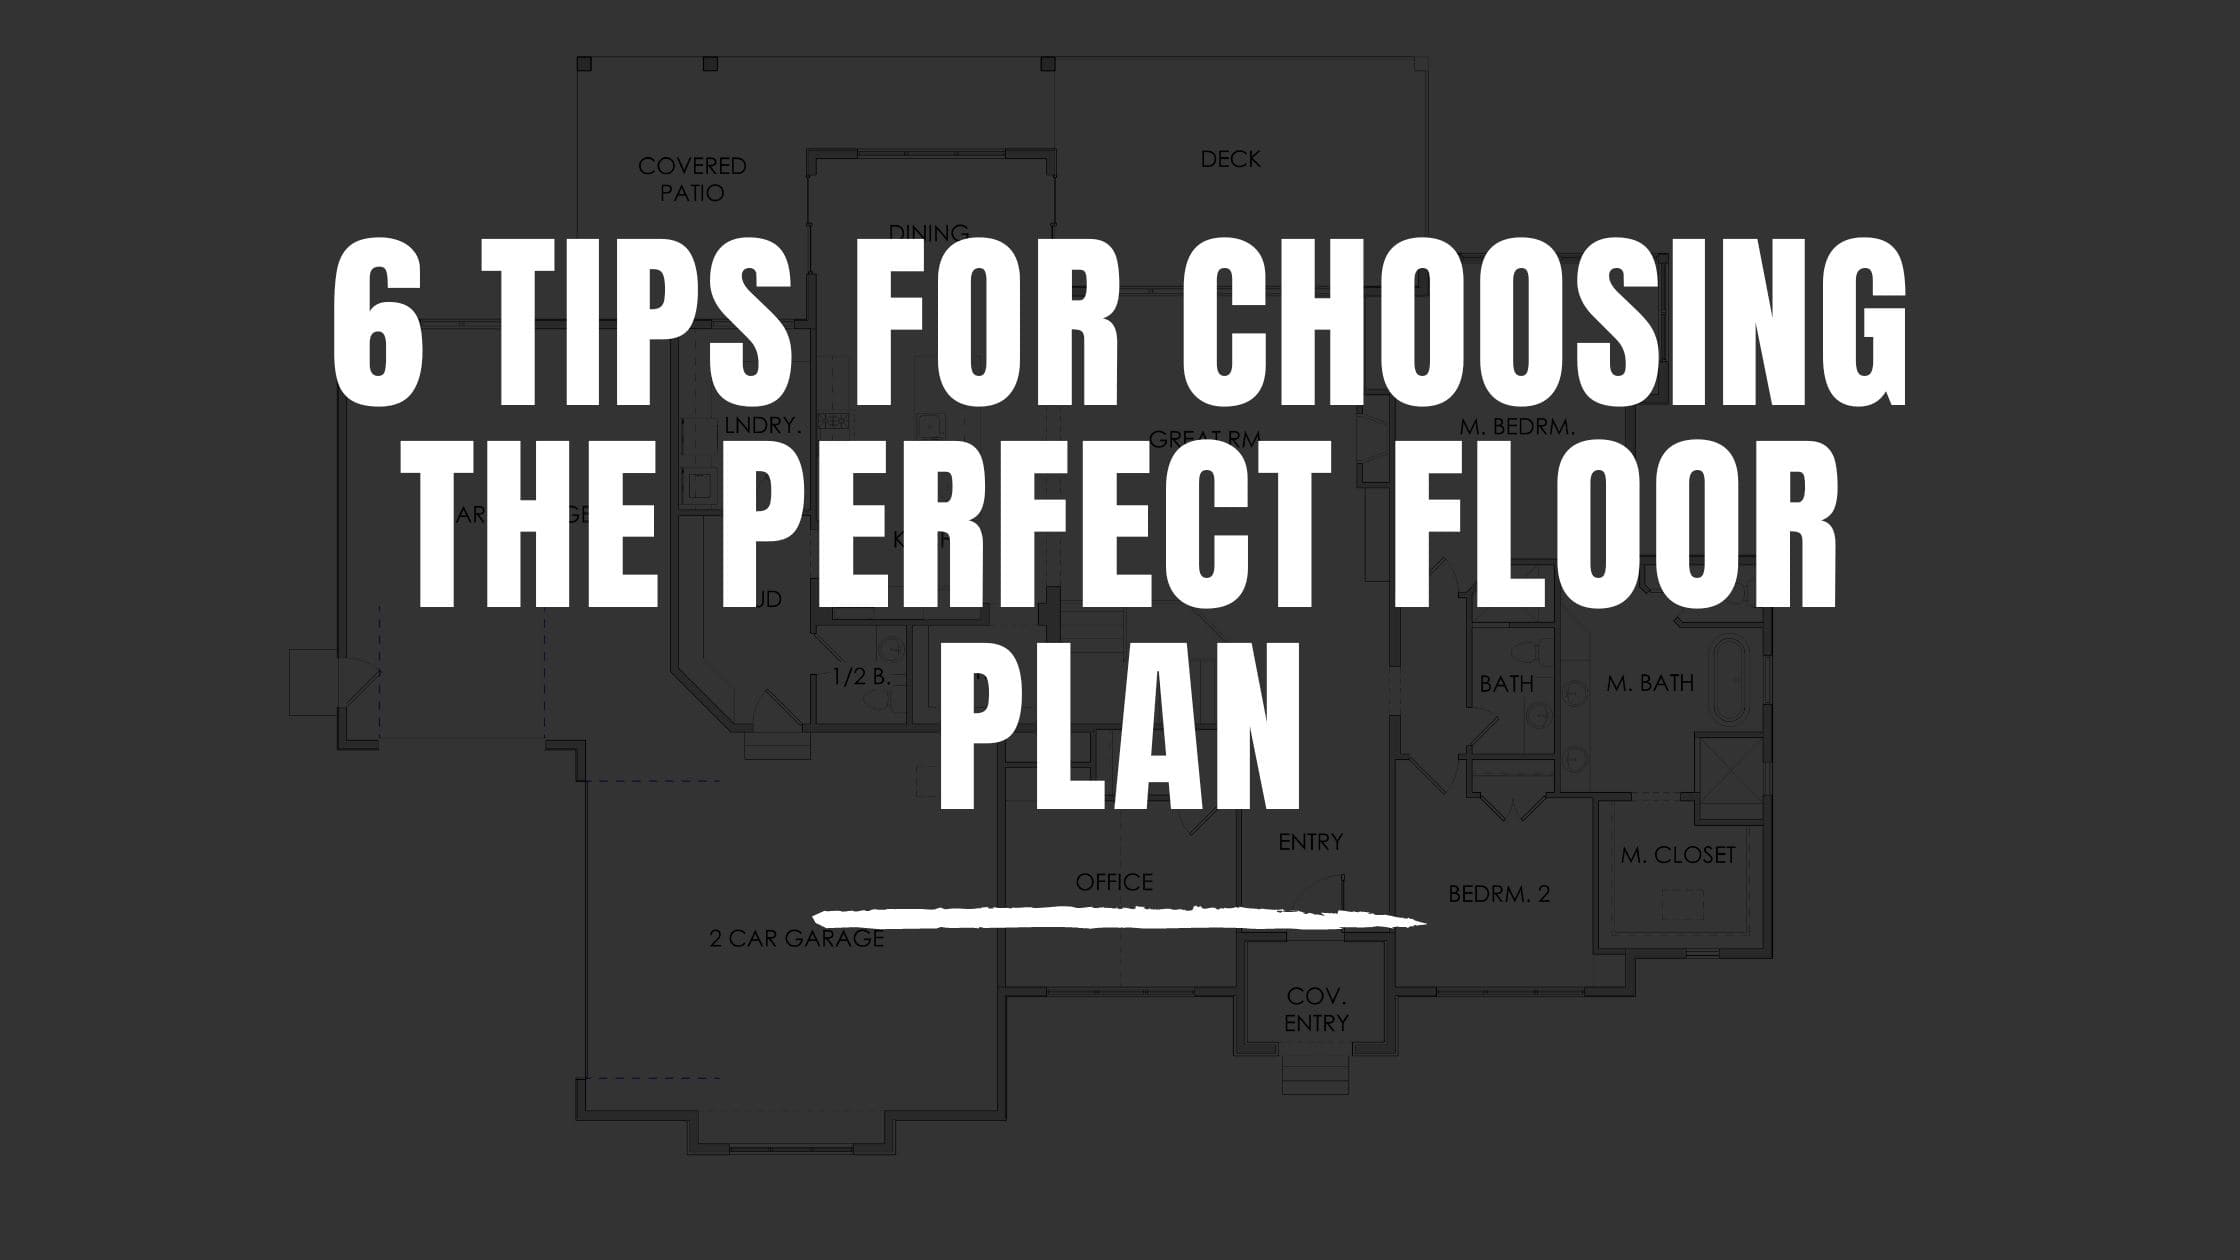 6 Tips for Choosing the Perfect Floor Plan